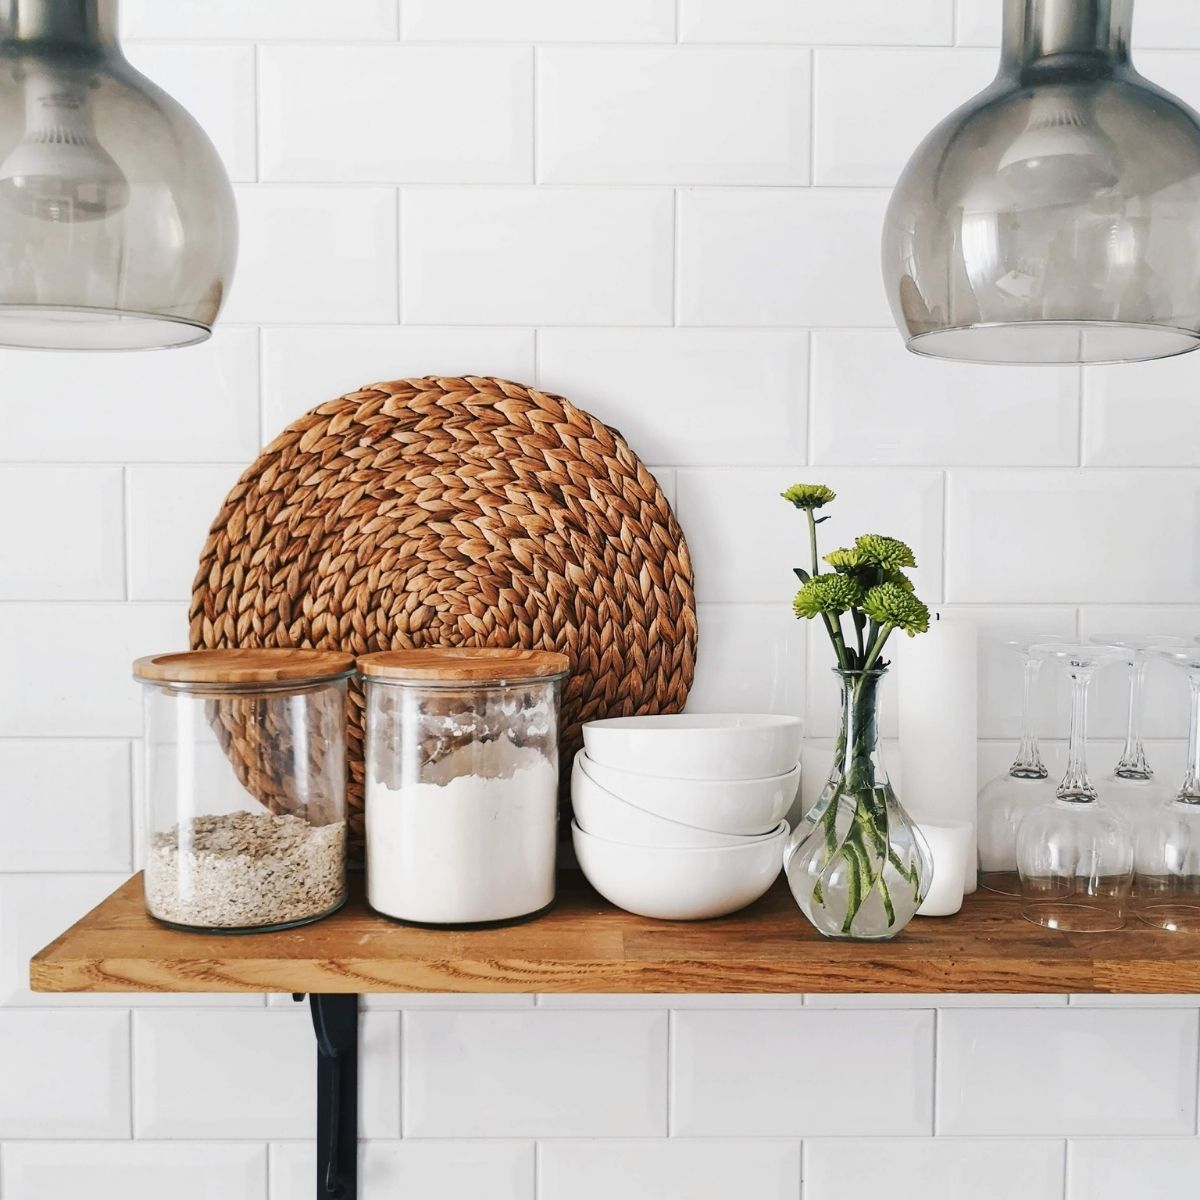 wood shelf on a white wall. Clear jars with wooden tops containing baking ingredients, white bowls, and greens in a vase sitting on shelf.